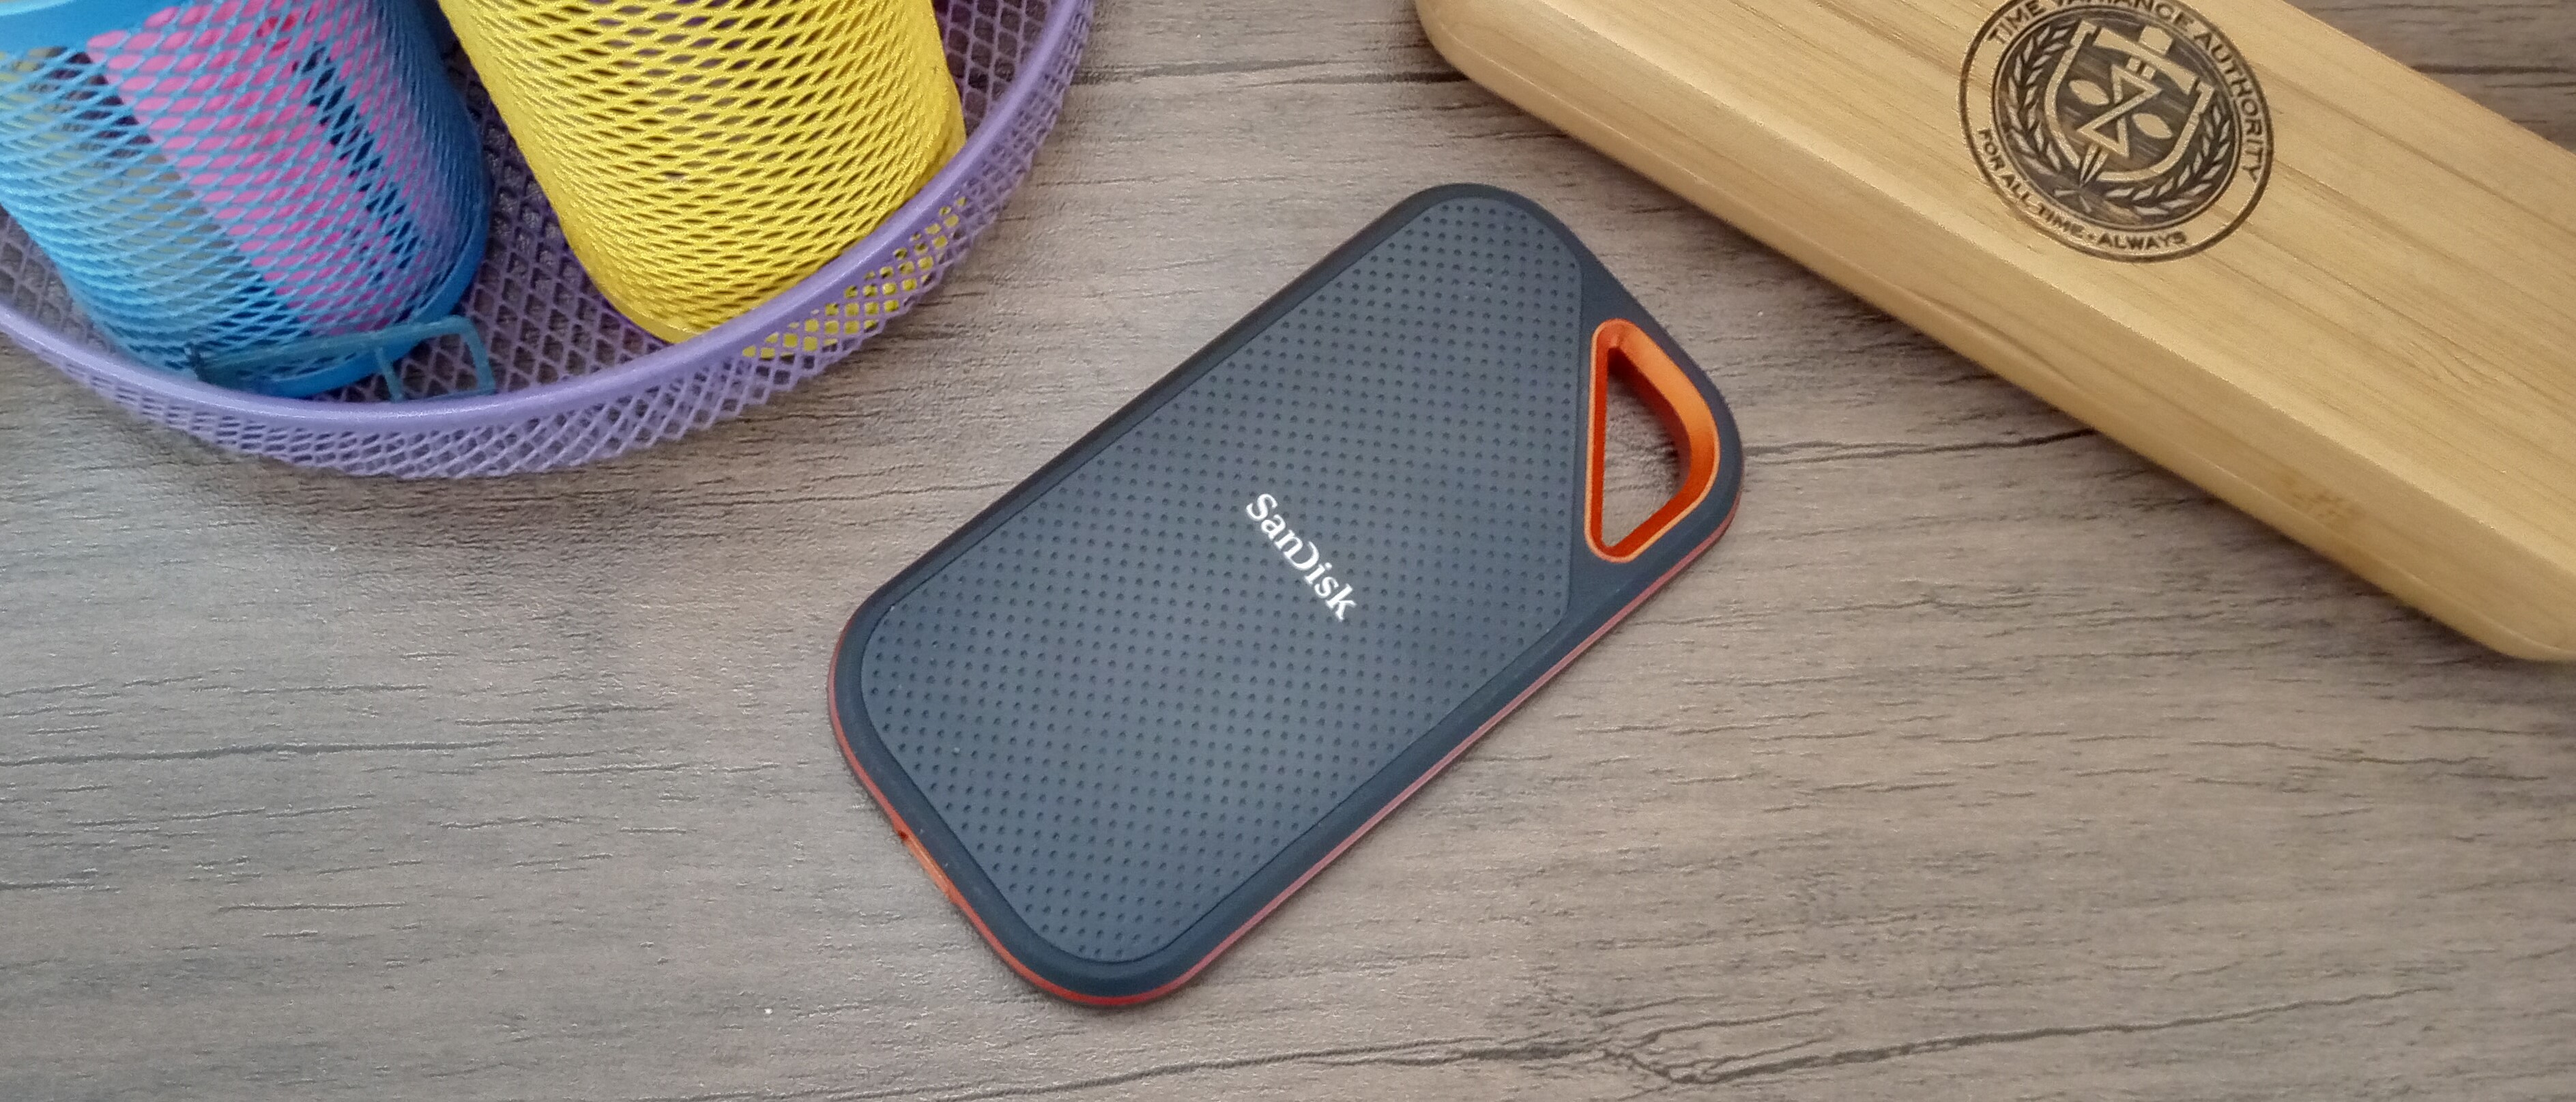 Hands-on review: SanDisk Extreme Pro portable SSD